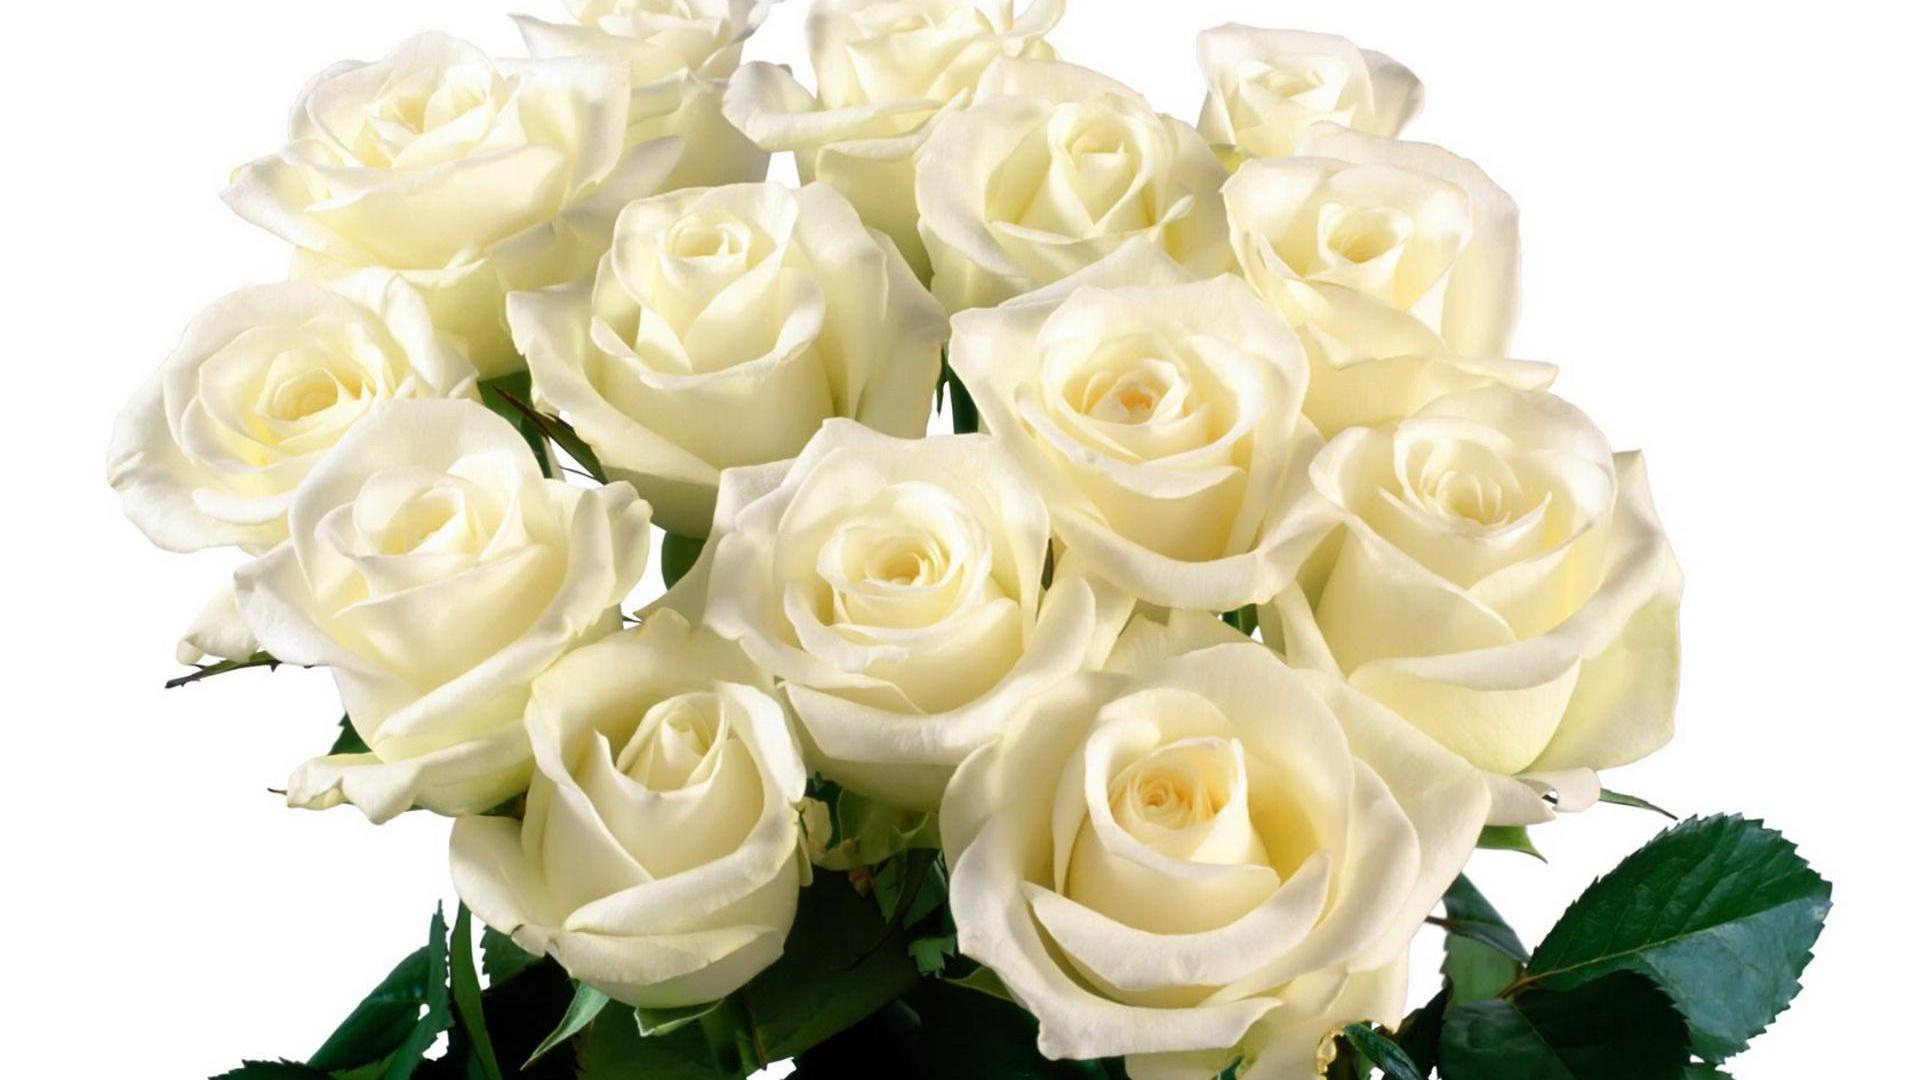 Beautiful white roses on a white background wallpapers and images 1920x1080